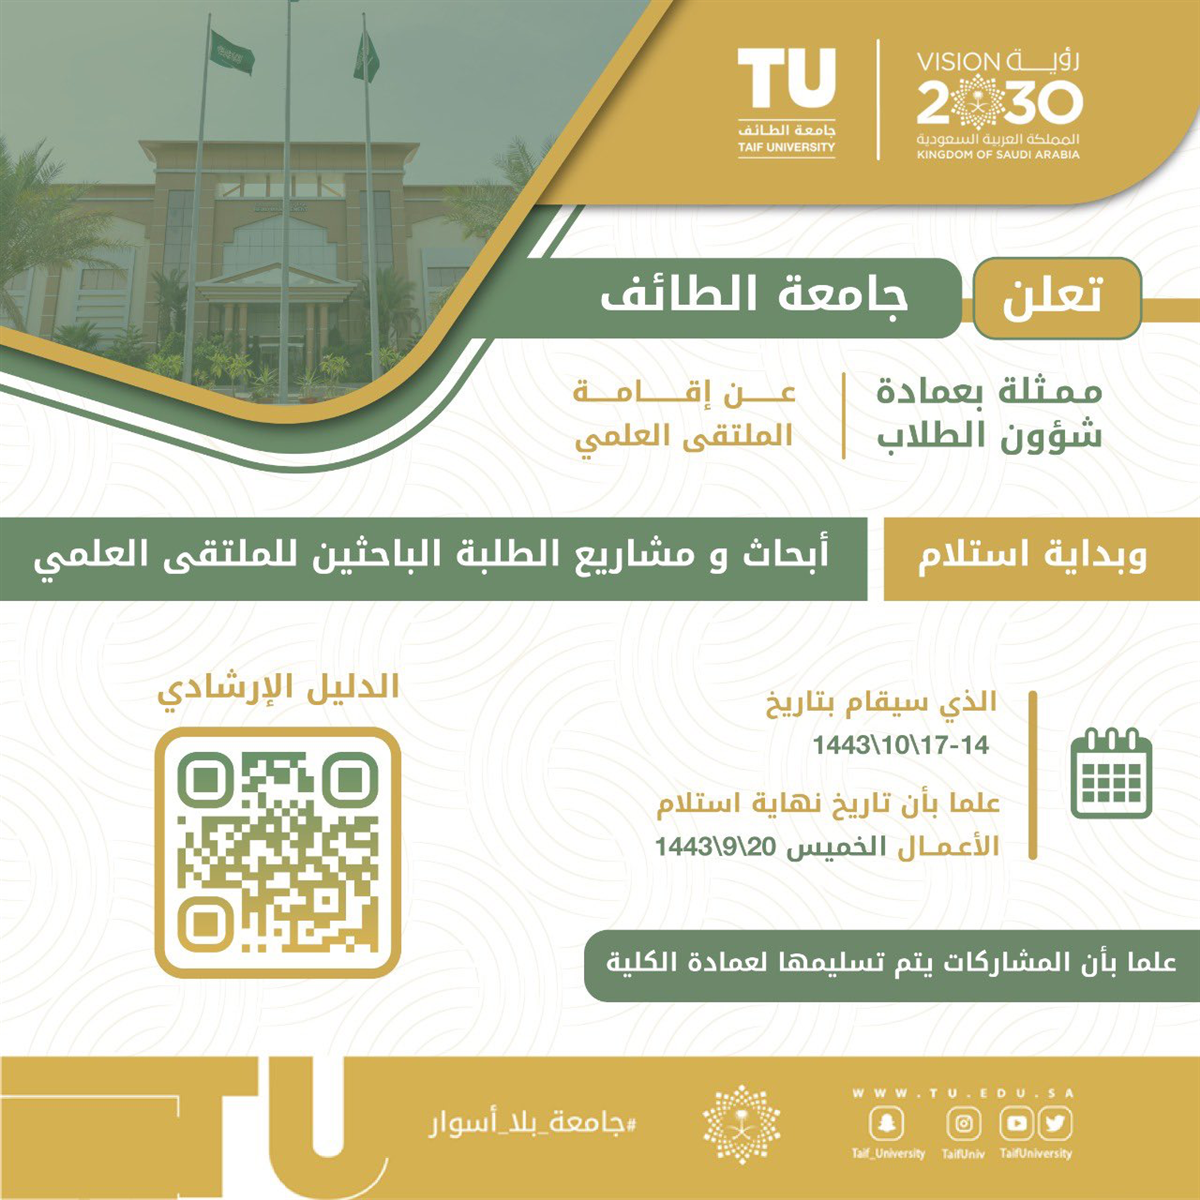 The Scientific Forum for the Research and Projects of University Students